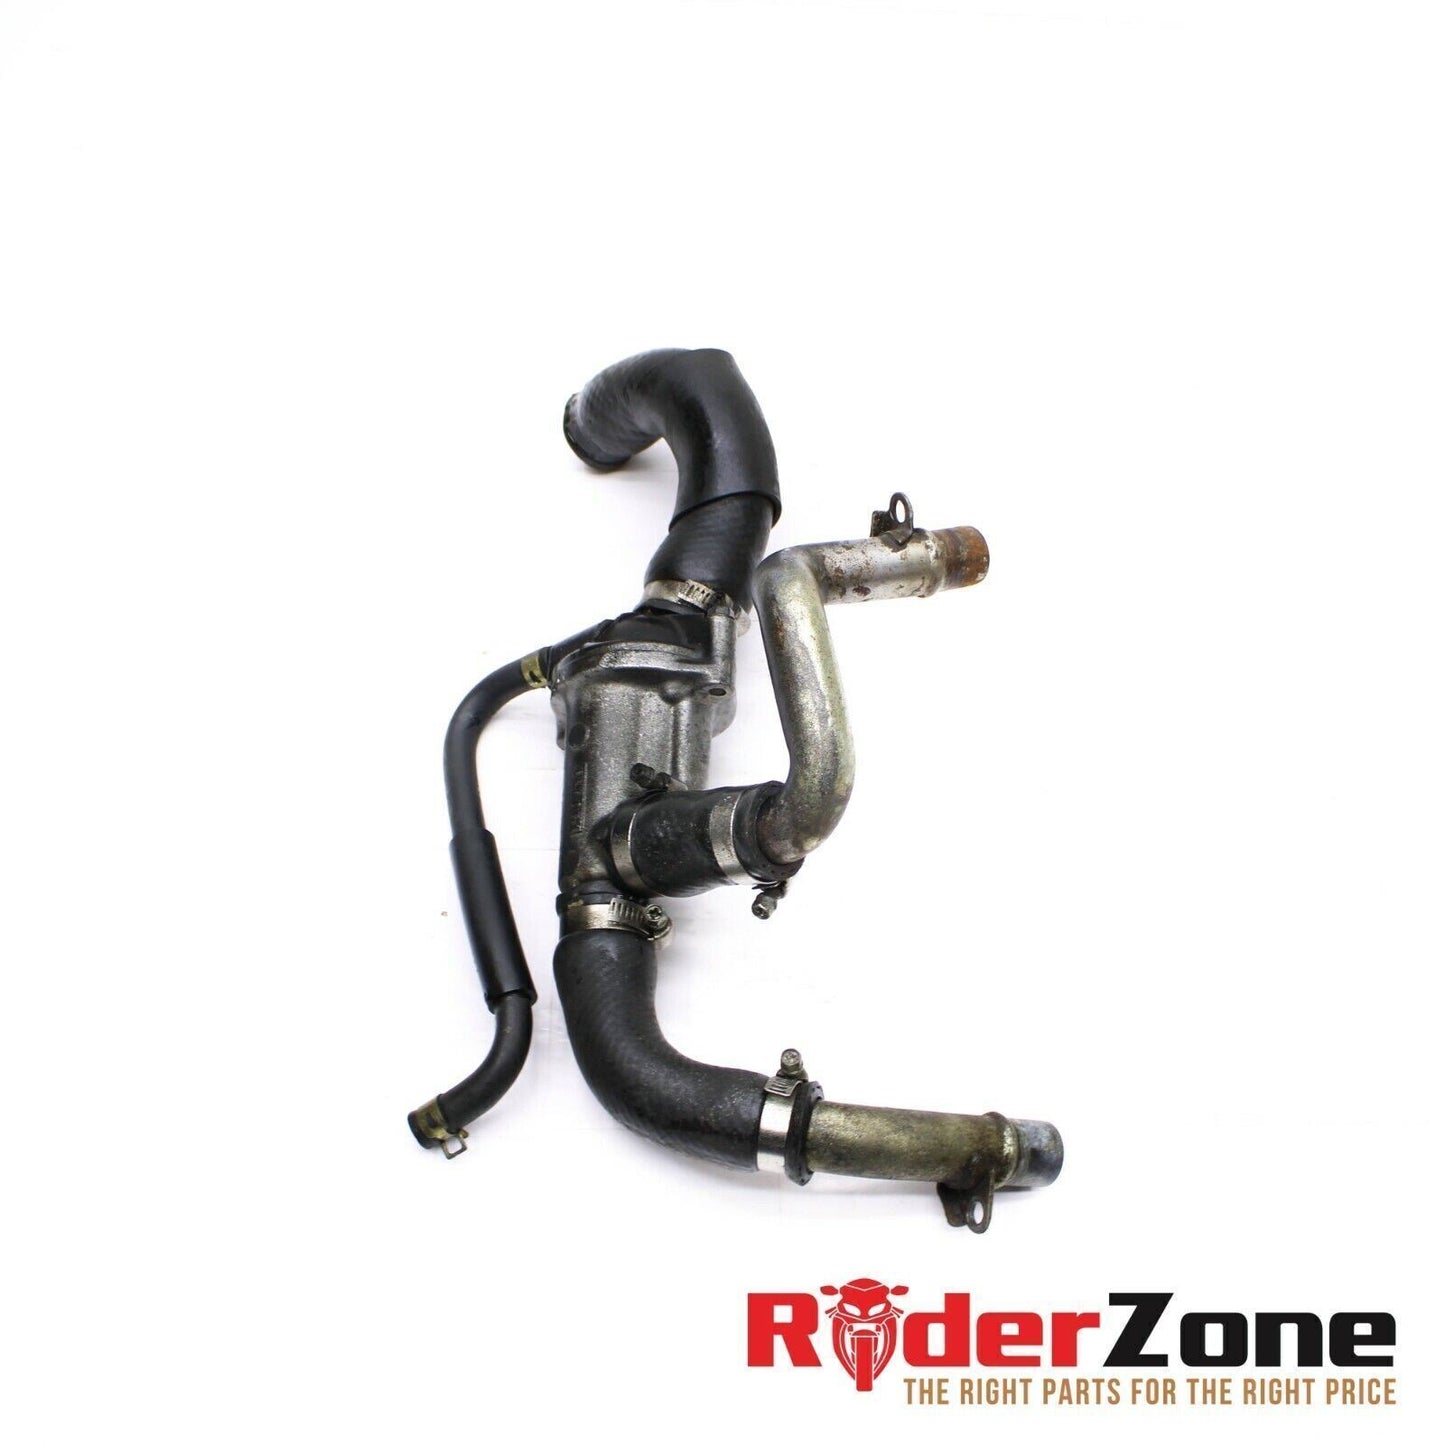 07 08 SUZUKI GSXR600 GSXR750 THERMOSTAT HOUSING ASSEMBLY HOSE PIPES COOLANT